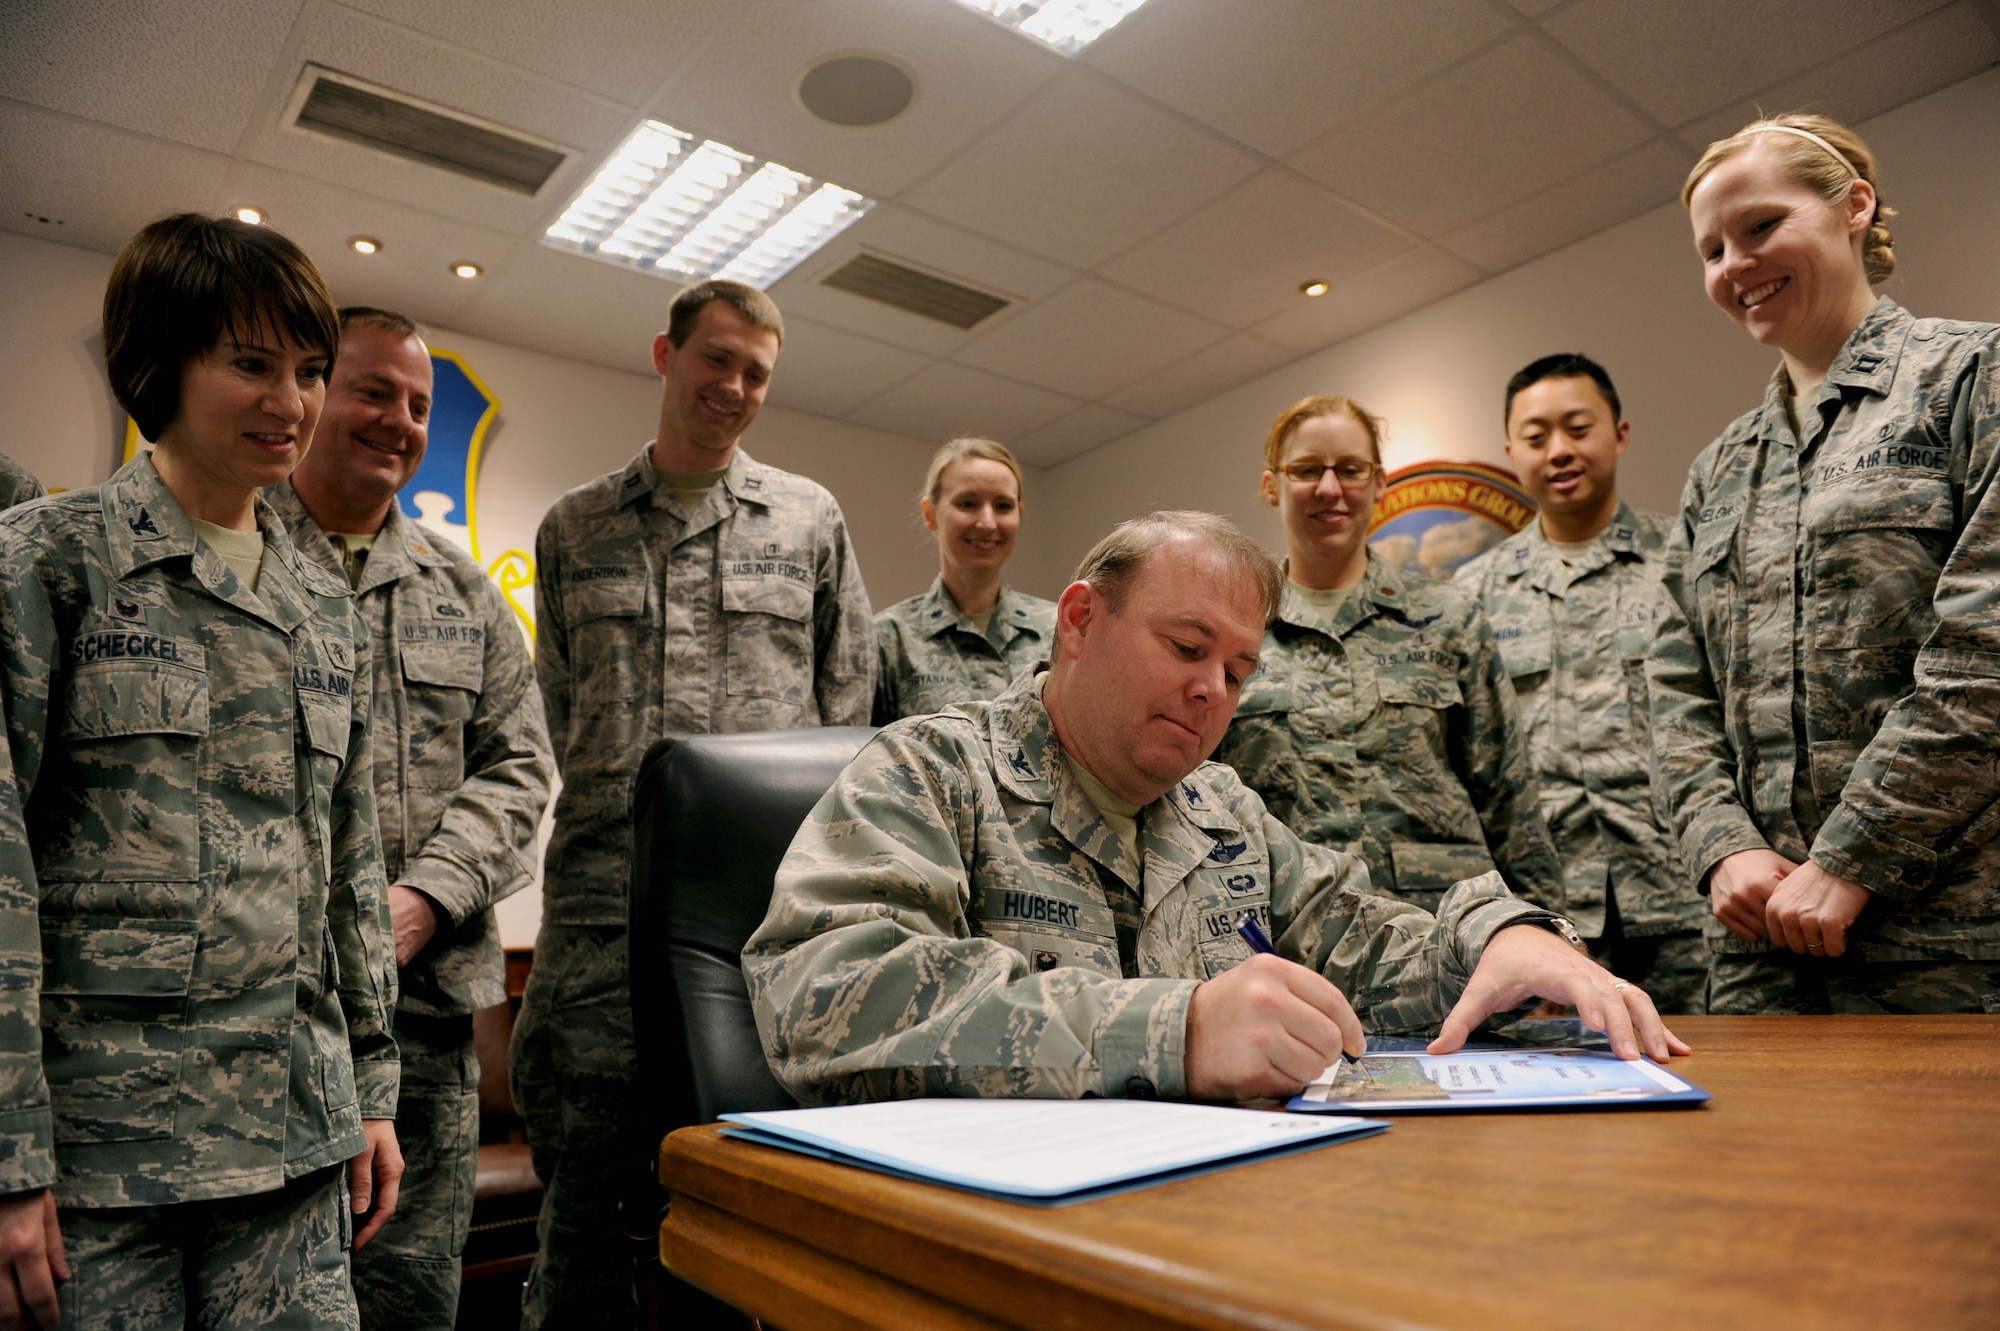 U.S. Air Force Col. Lars Hubert, 52nd Fighter Wing acting commander, signs a certificate and declaration surrounded by 52nd Medical Group Airmen in the wing conference room at Spangdahlem Air Base, Germany, Jan. 21, 2015. The proclamation designated Jan. 26-30, 2015 as Biomedical Science Corps Appreciation Week. (U.S. Air Force photo by Airman 1st Class Timothy Kim/Released)